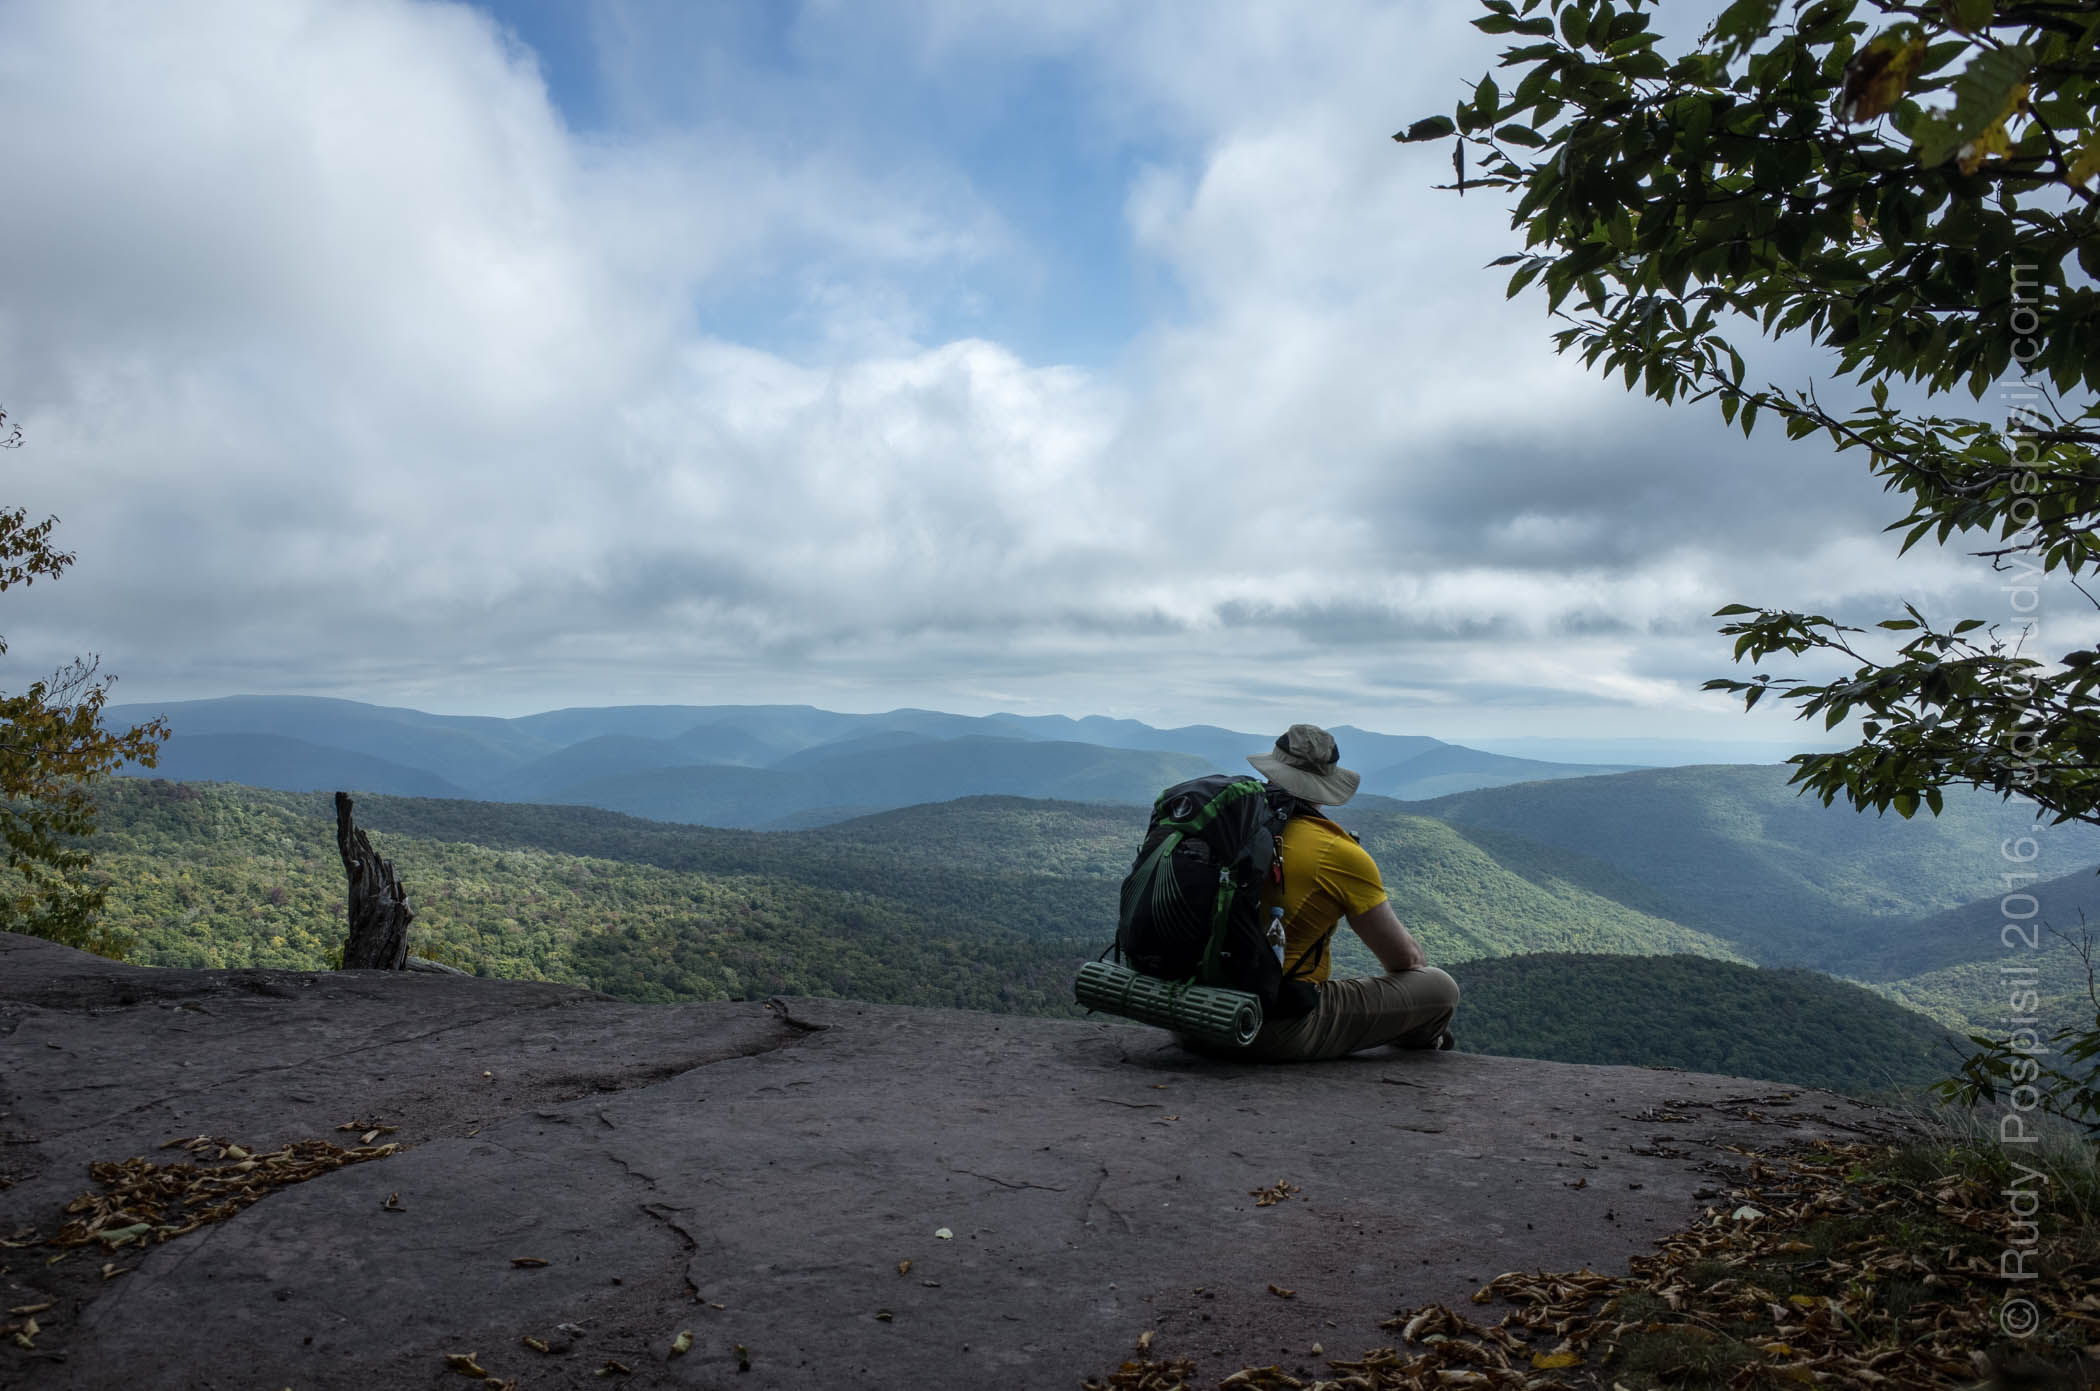 Sitting on the Giant Ledge on the way to the top of Panther Mountain in the Catskills.